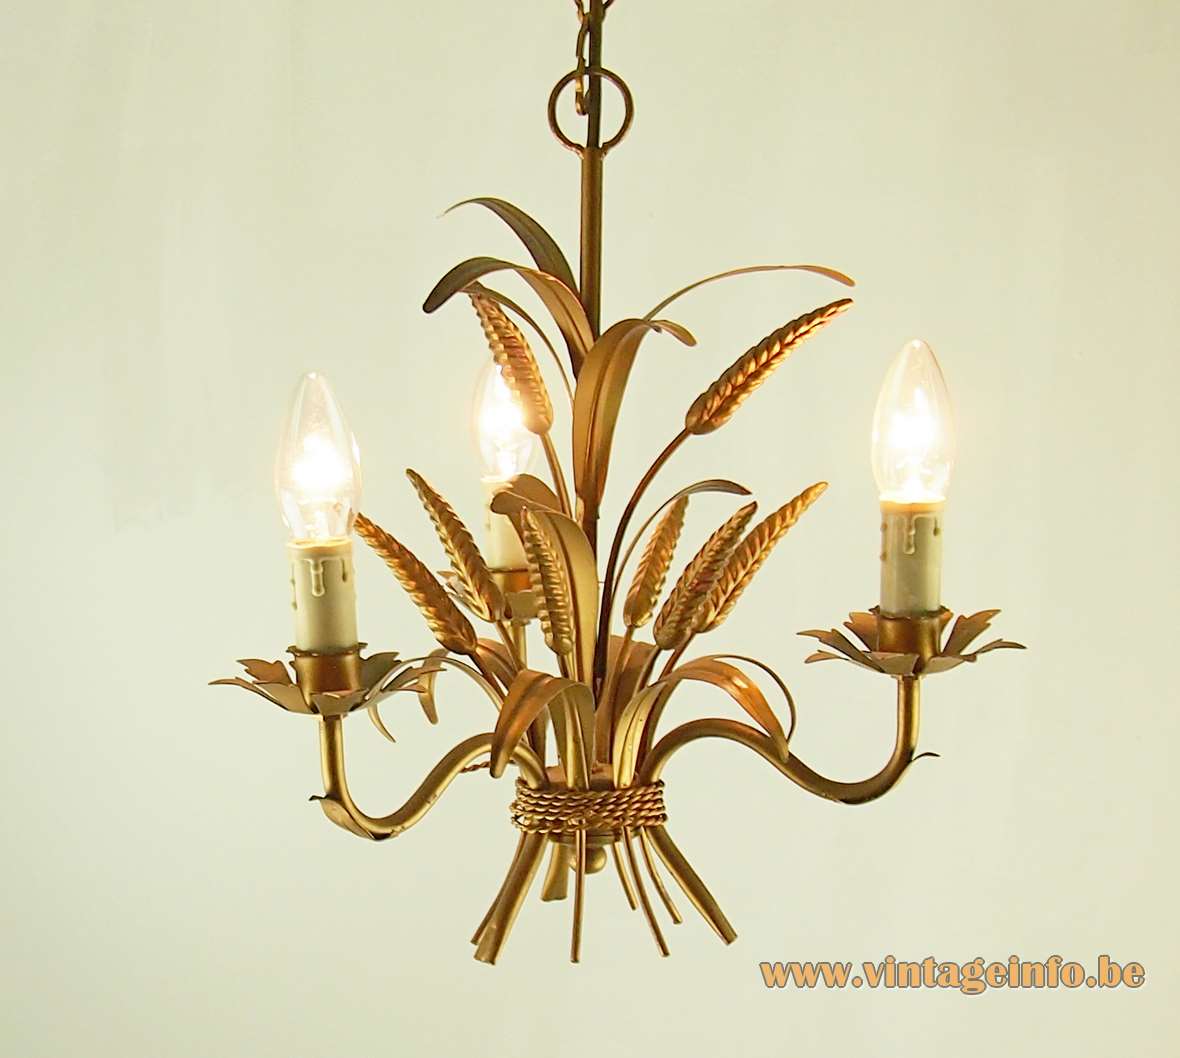 Small sheaf of wheat chandelier gold painted metal candle light bulbs Zicoli Leuchten Germany corn maize